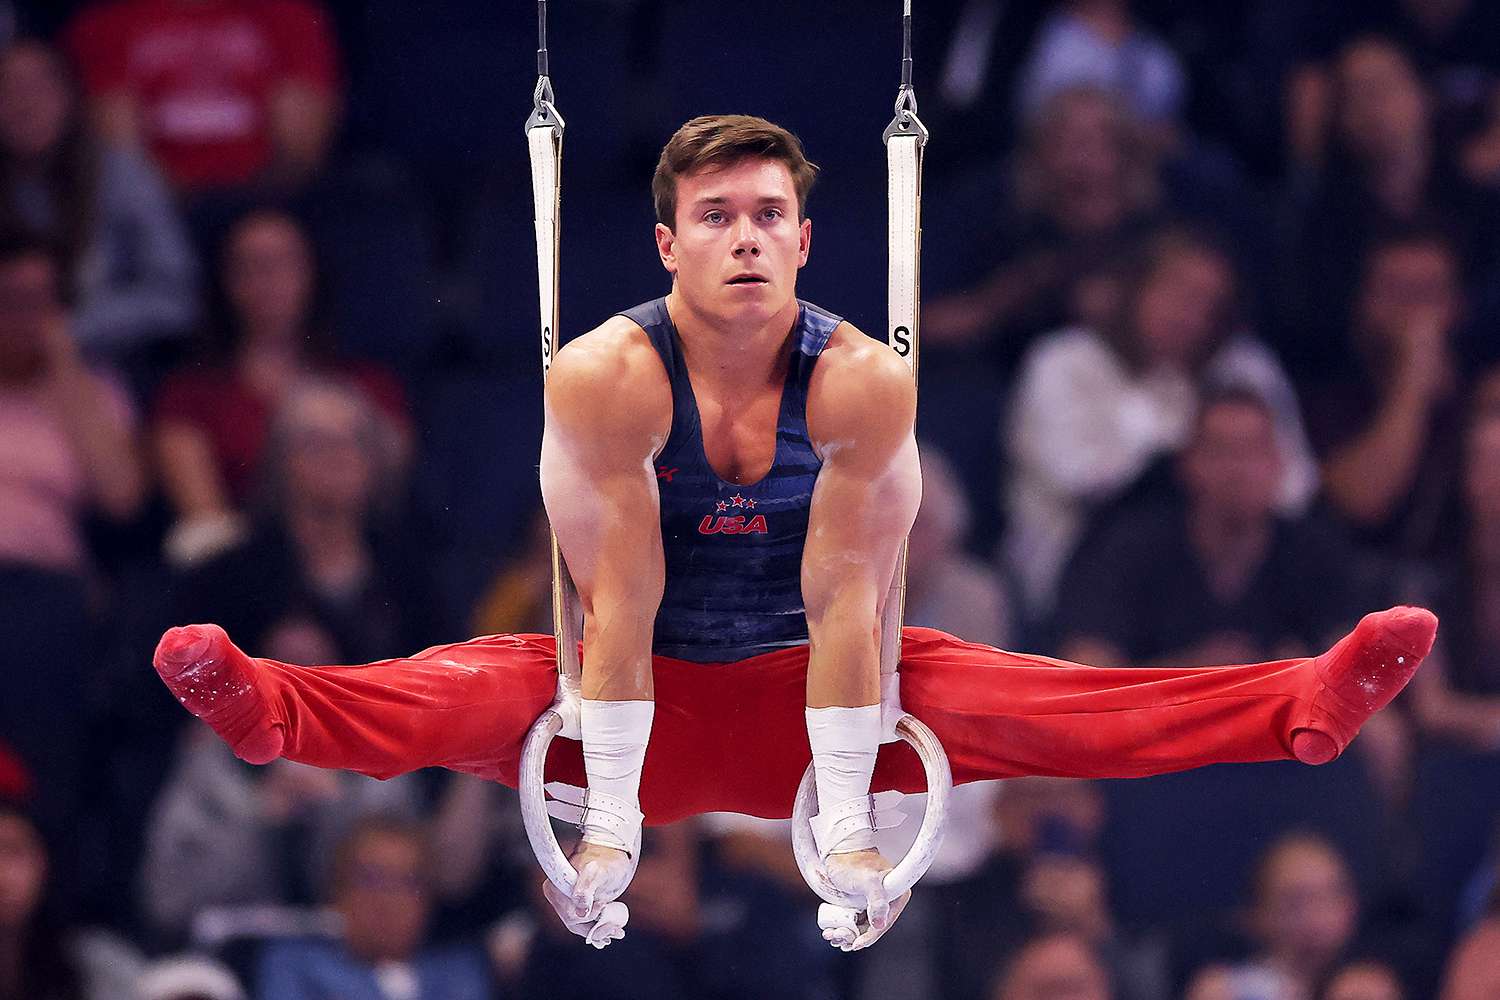 Brody Malone competes on the Rings on Day One of the 2024 U.S. Olympic Team Gymnastics Trials at Target Center on June 27, 2024 in Minneapolis, Minnesota.